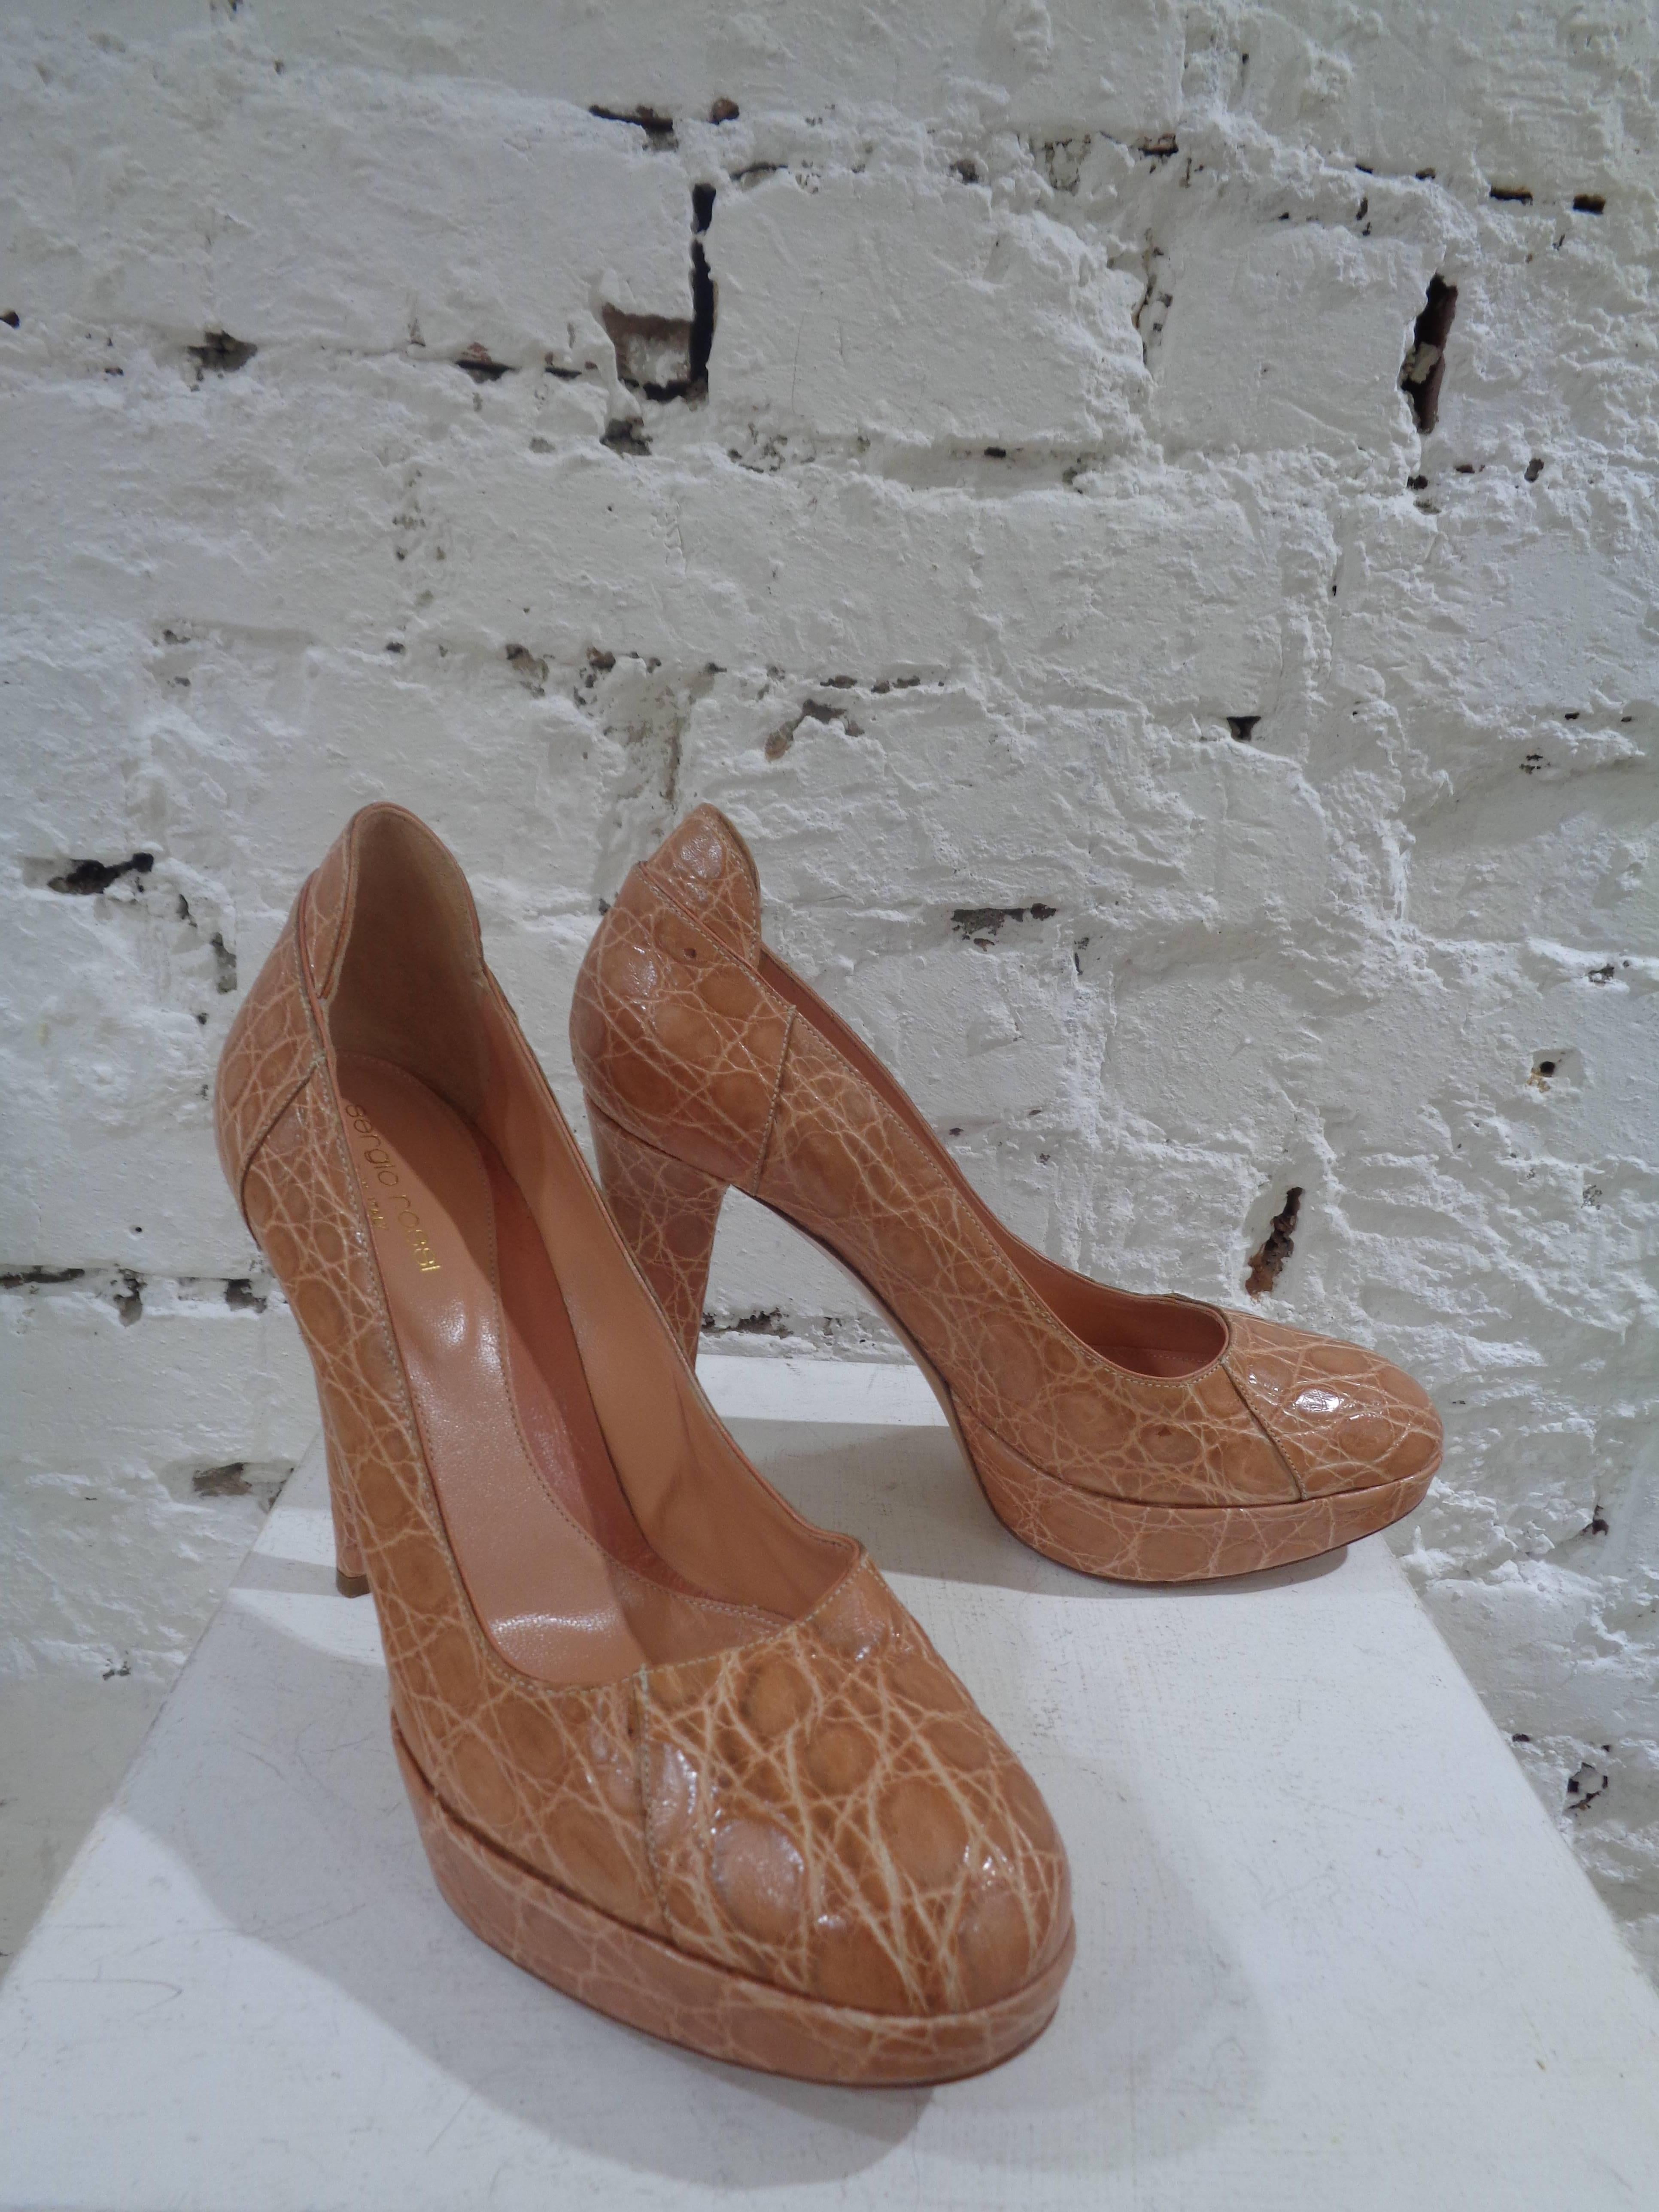 Sergio Rossi pink leather croco stamp high heel decollete
totally made in italy in size 39

unworn